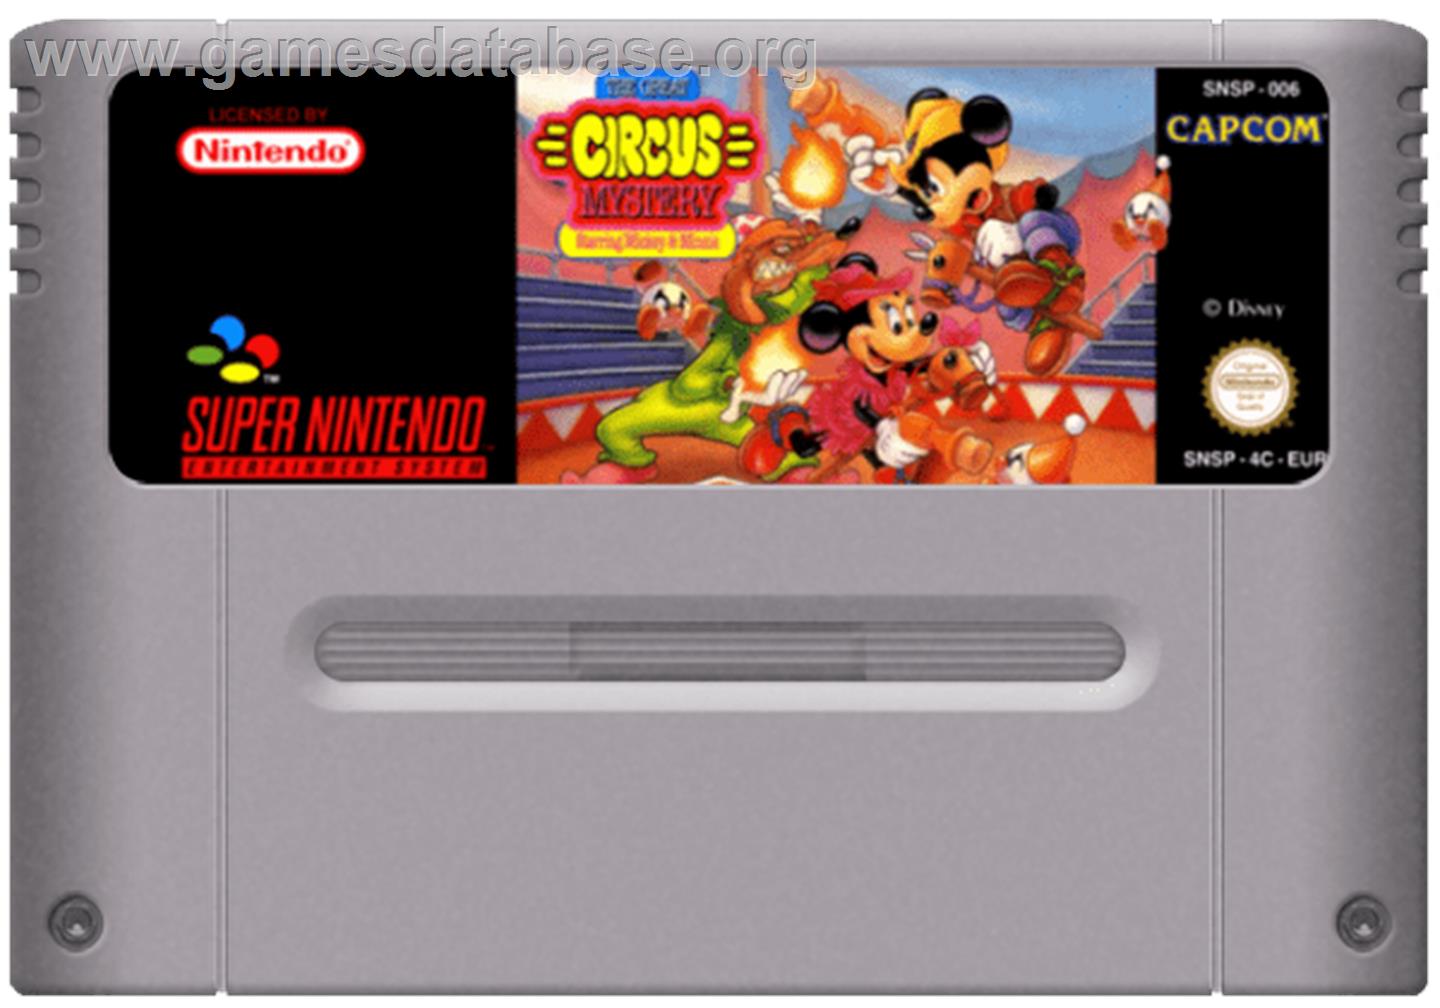 The Great Circus Mystery starring Mickey and Minnie Mouse - Nintendo SNES - Artwork - Cartridge